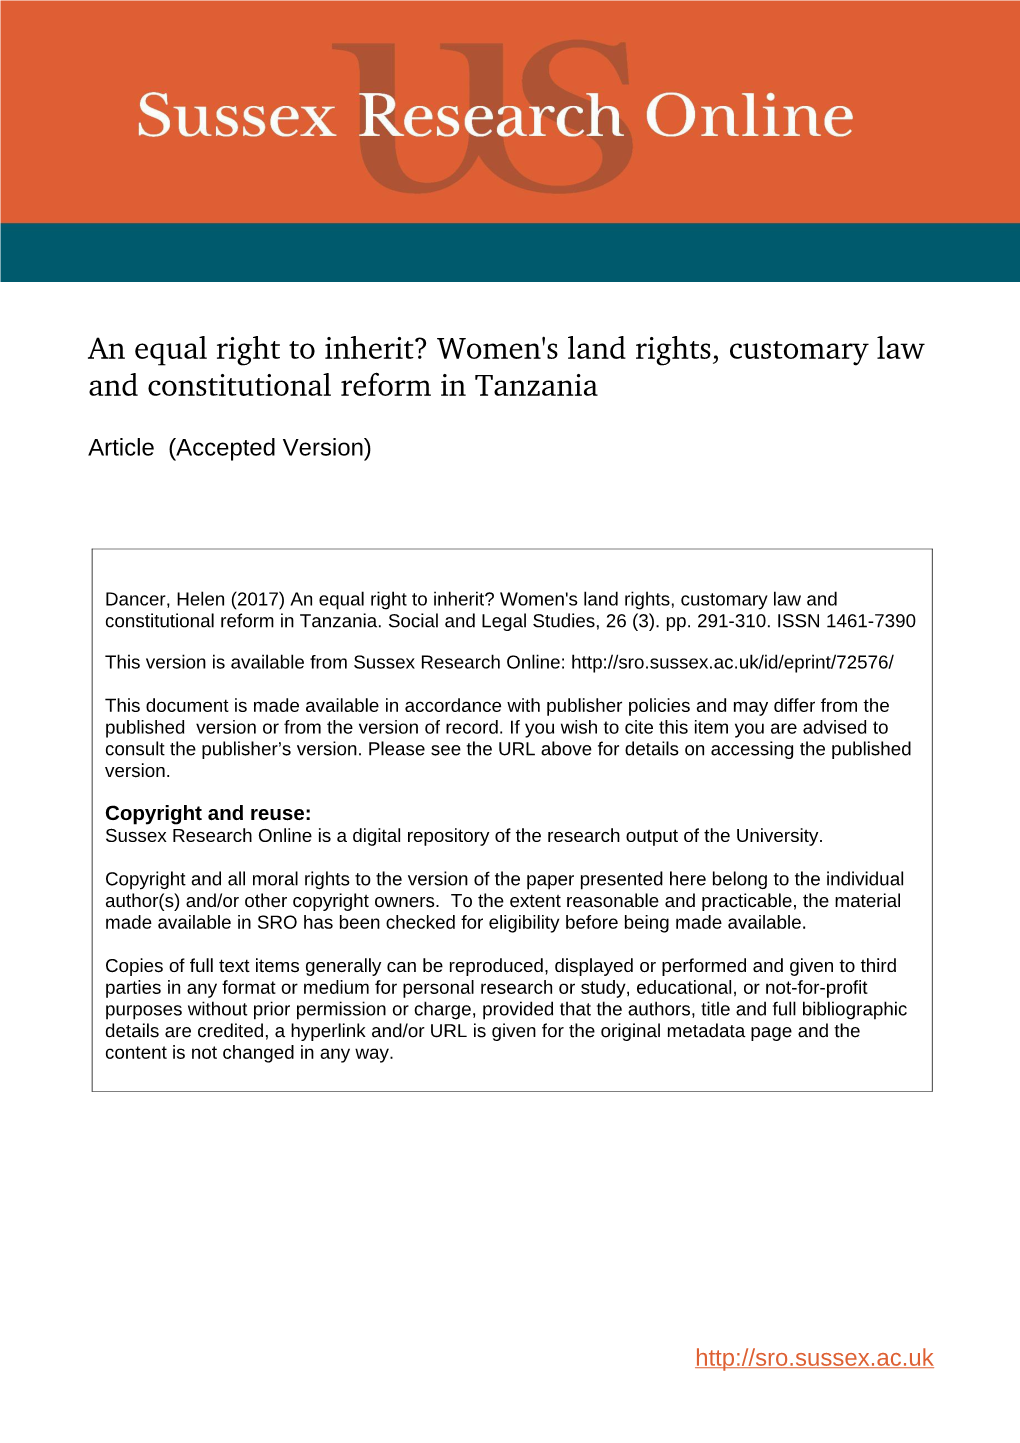 An Equal Right to Inherit? Women's Land Rights, Customary Law and Constitutional Reform in Tanzania